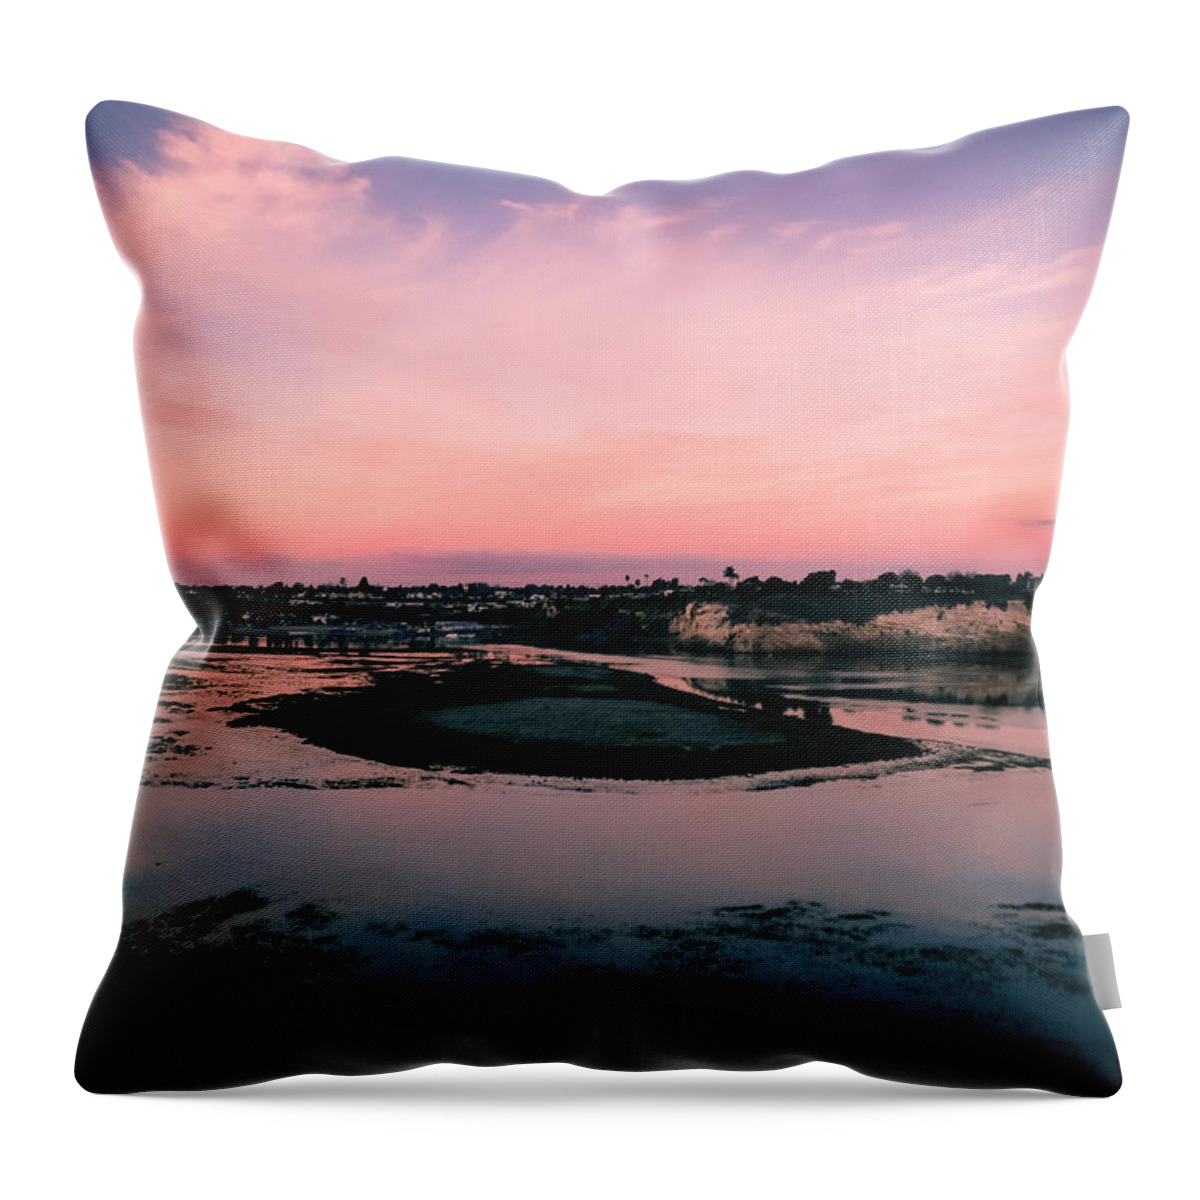 Pale Throw Pillow featuring the photograph Pale Pink Serenity by Pamela Newcomb